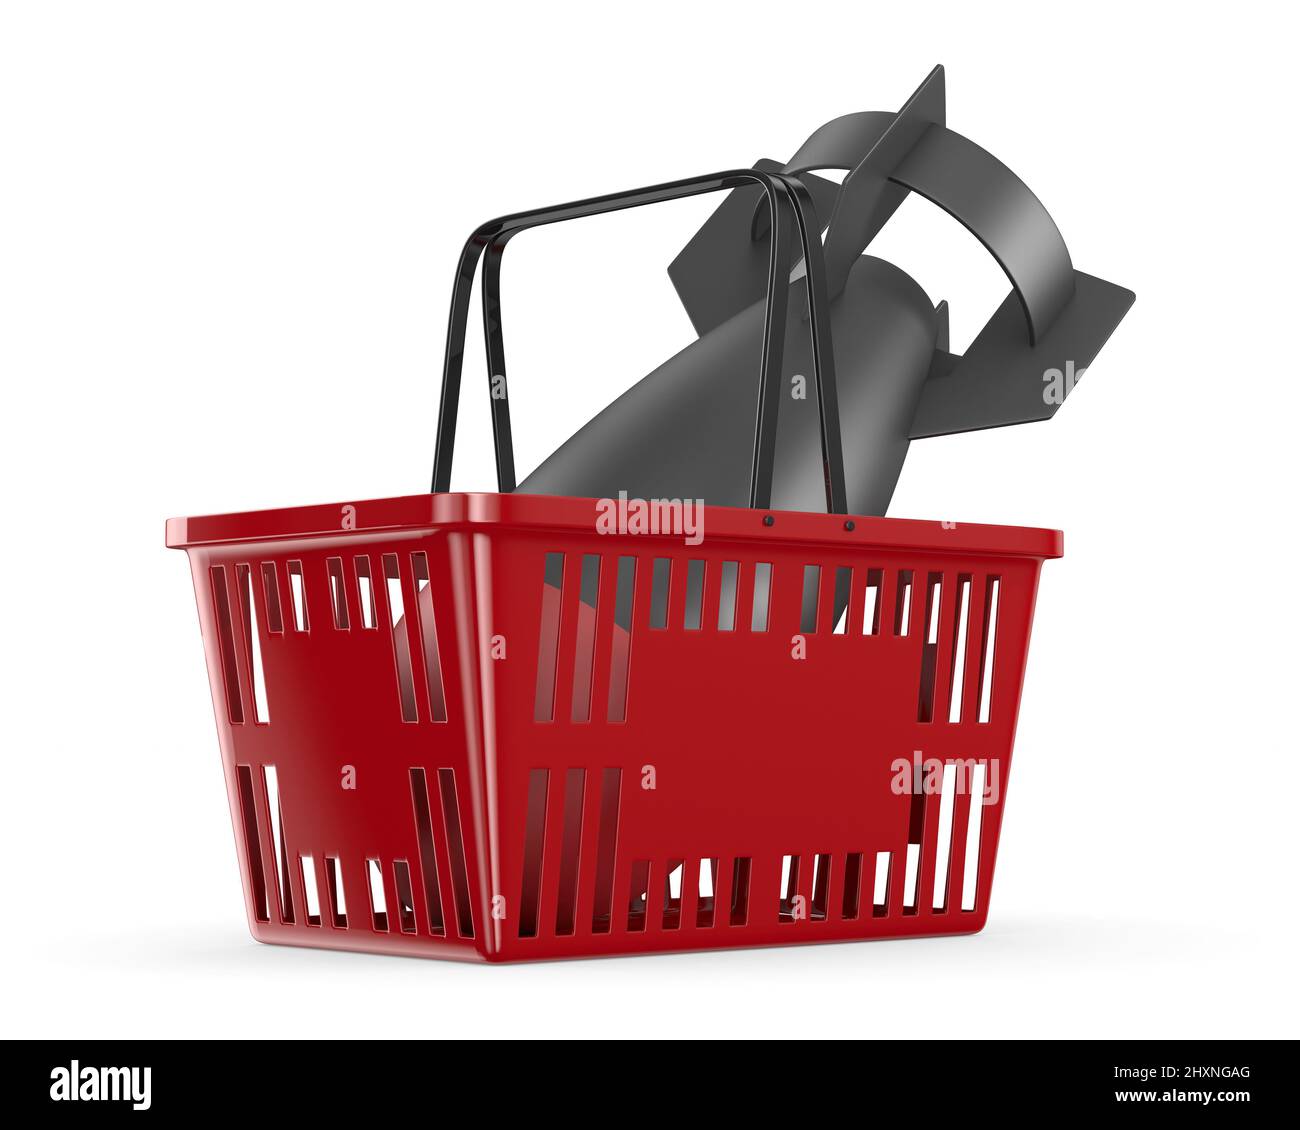 Aerial bomb  and red shopping basket on white background. Isolated 3d illustration Stock Photo